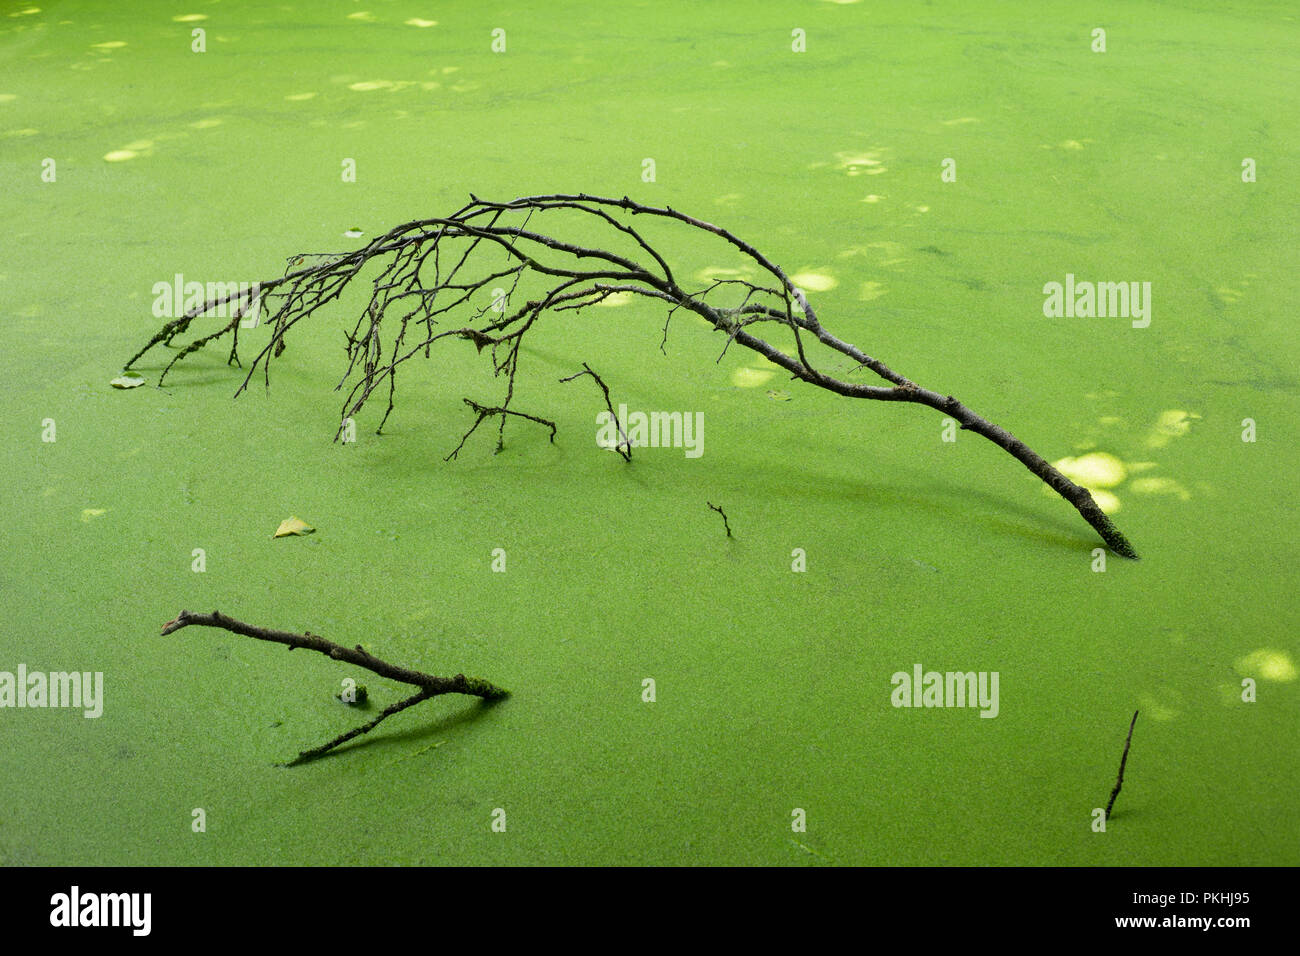 Water surface full of light green duck weed and dry twig stick out of it Stock Photo